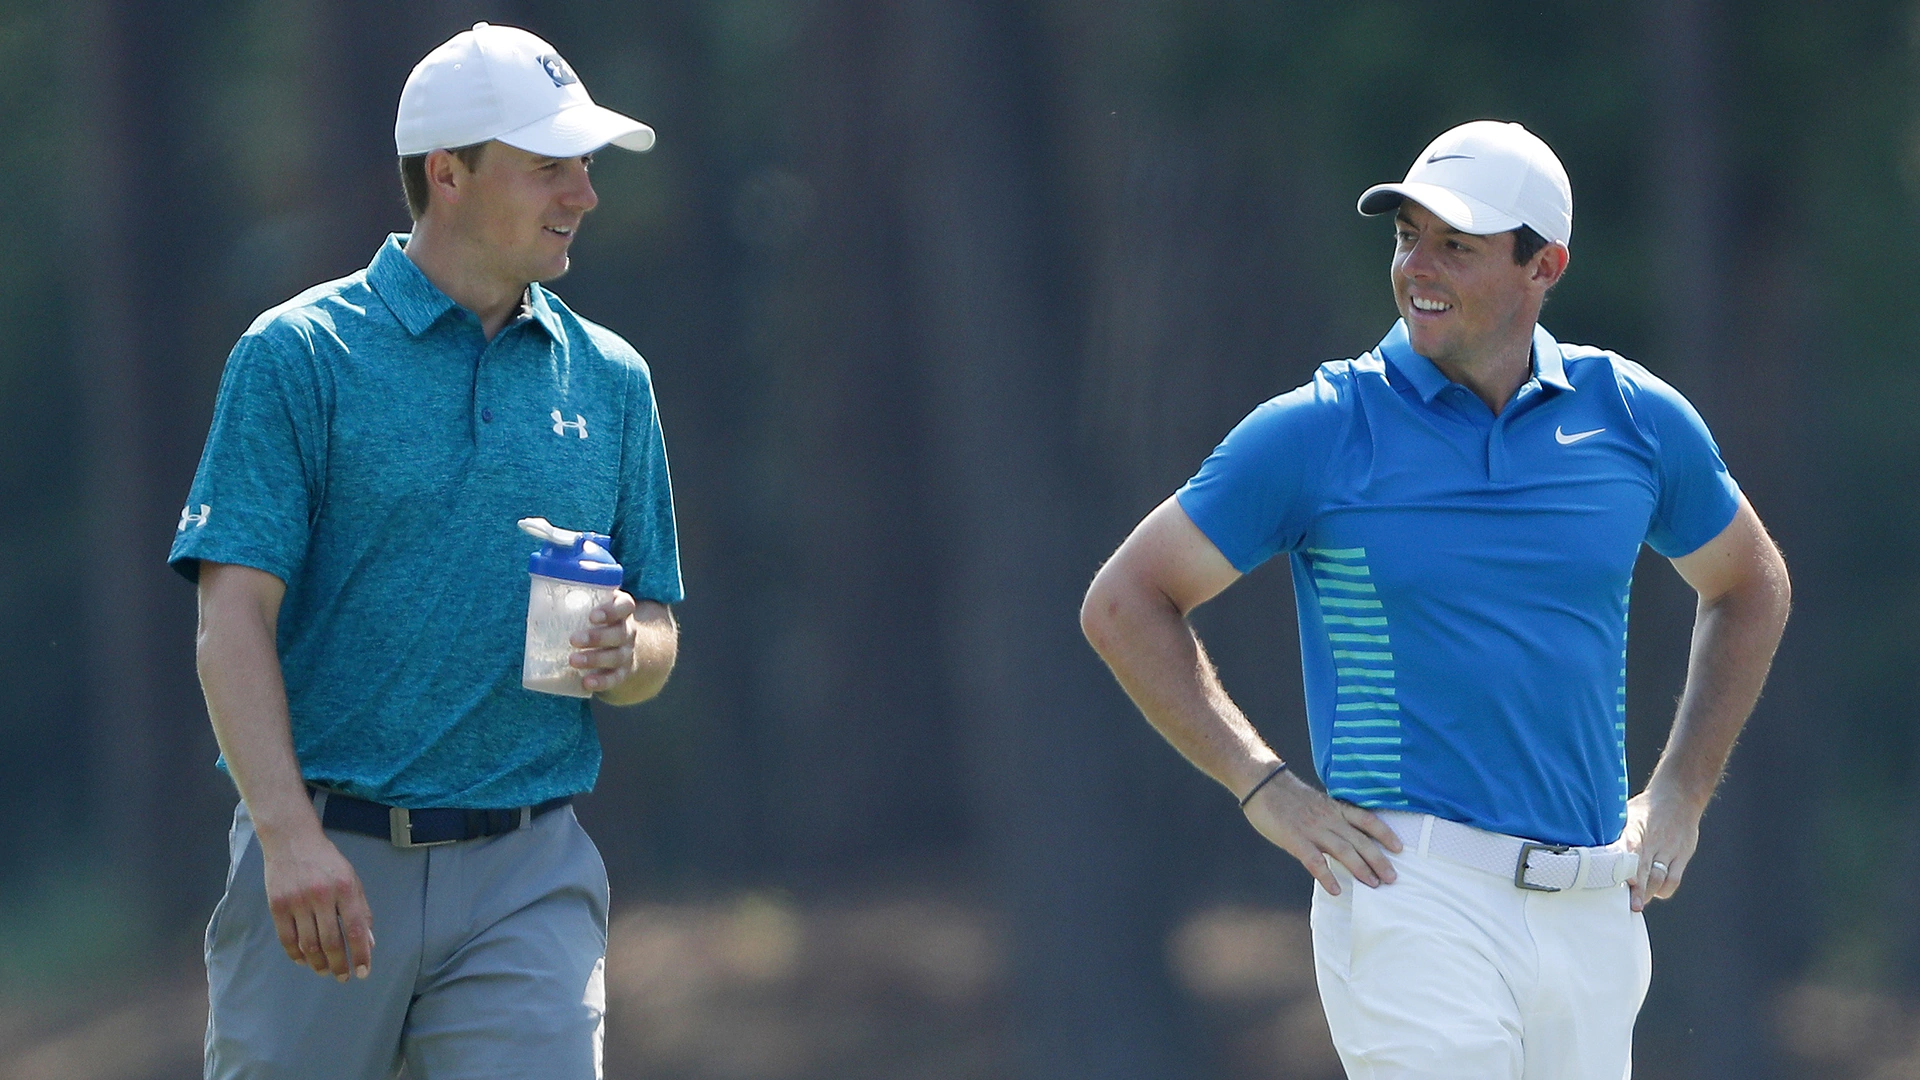 Groupings announced for Spieth, McIlroy, others at PGA Championship